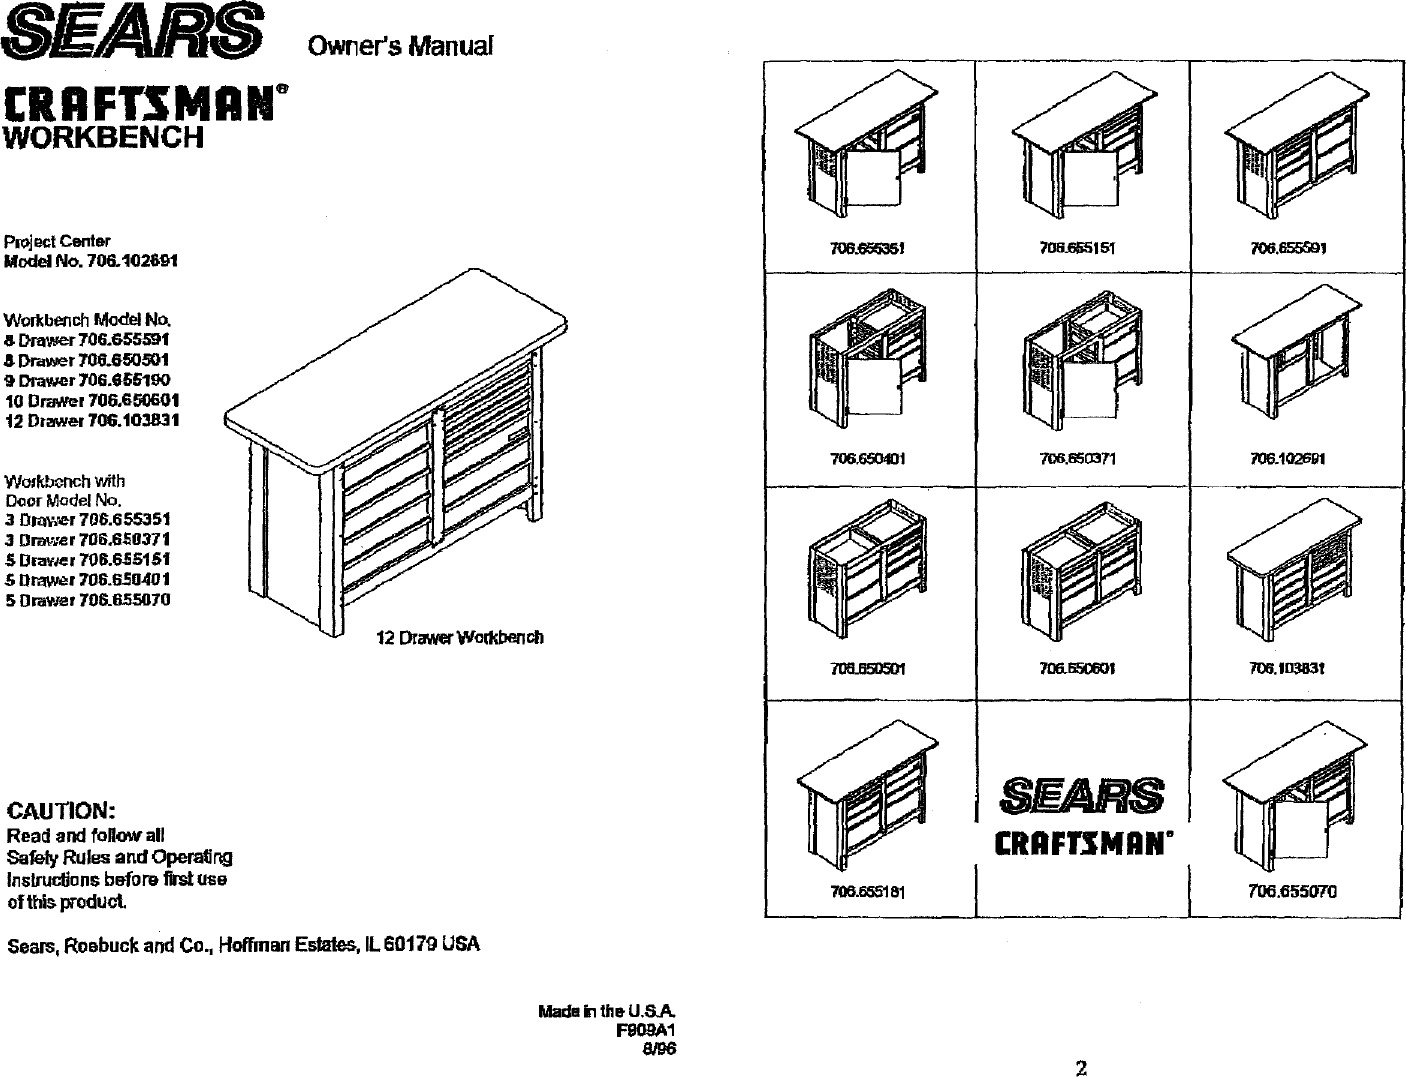 Page 1 of 2 - Craftsman 706598310 User Manual  4 DRAWER WORKBENCH - Manuals And Guides L0803287